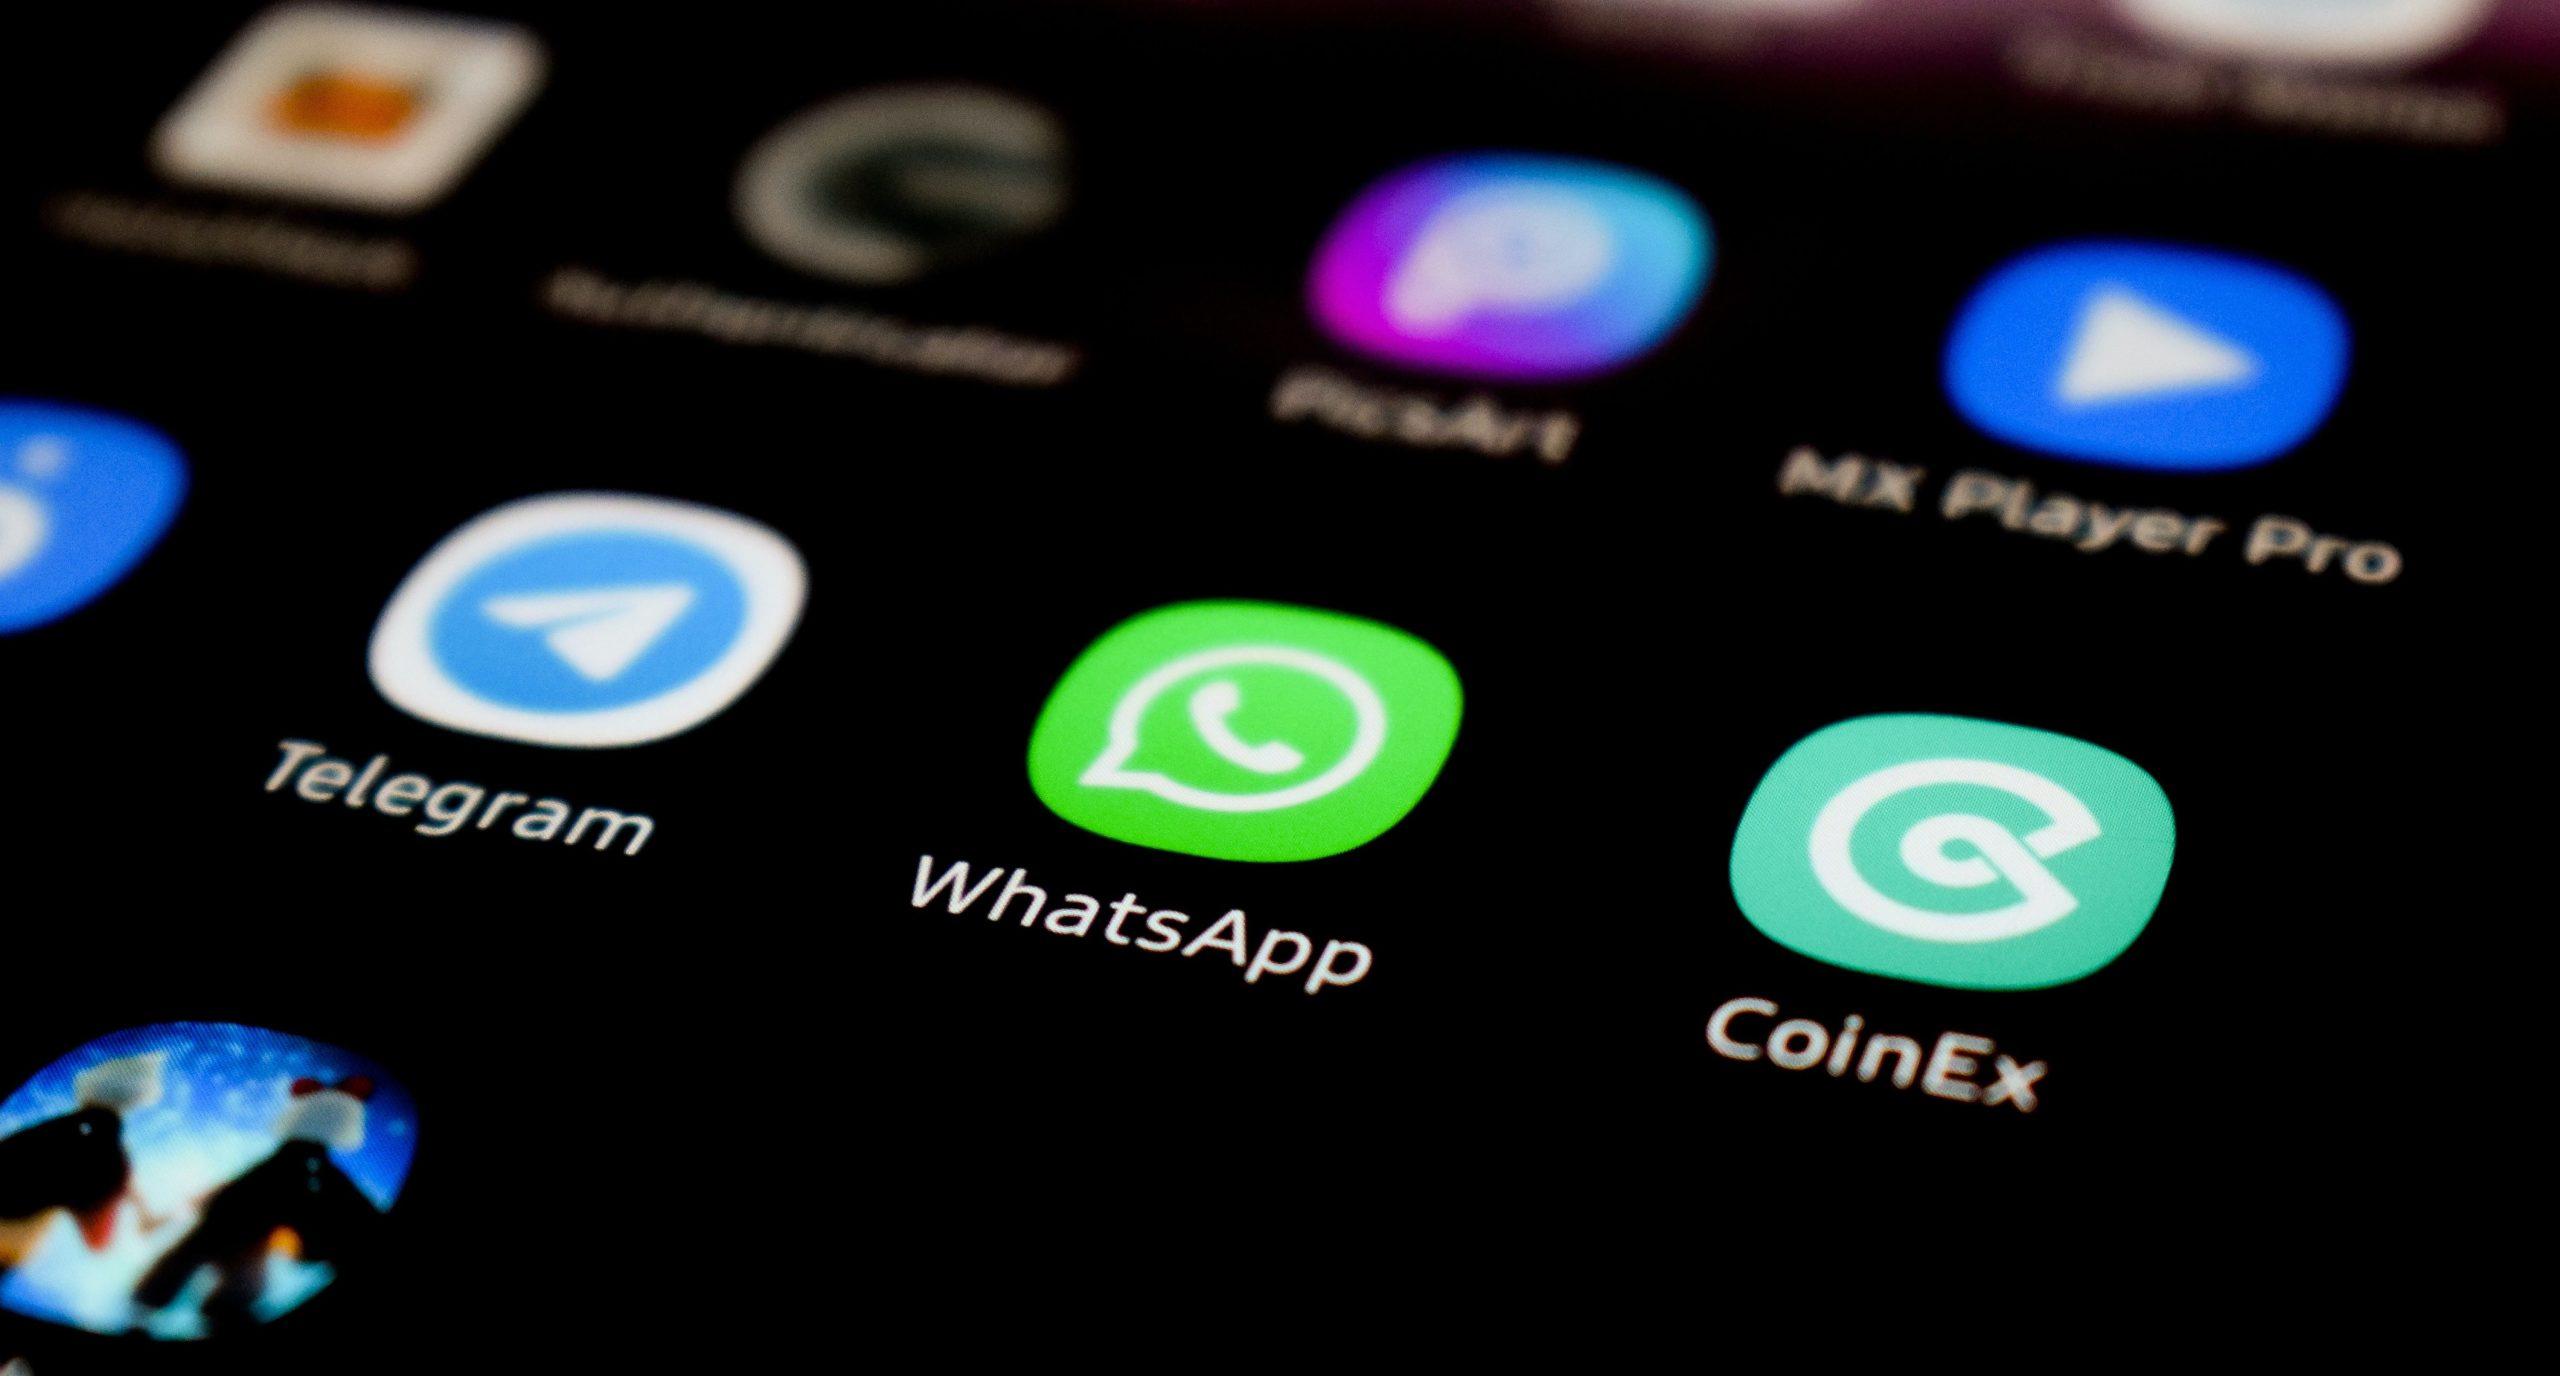 WhatsApp icon and other apps appearing on a smartphone screen.